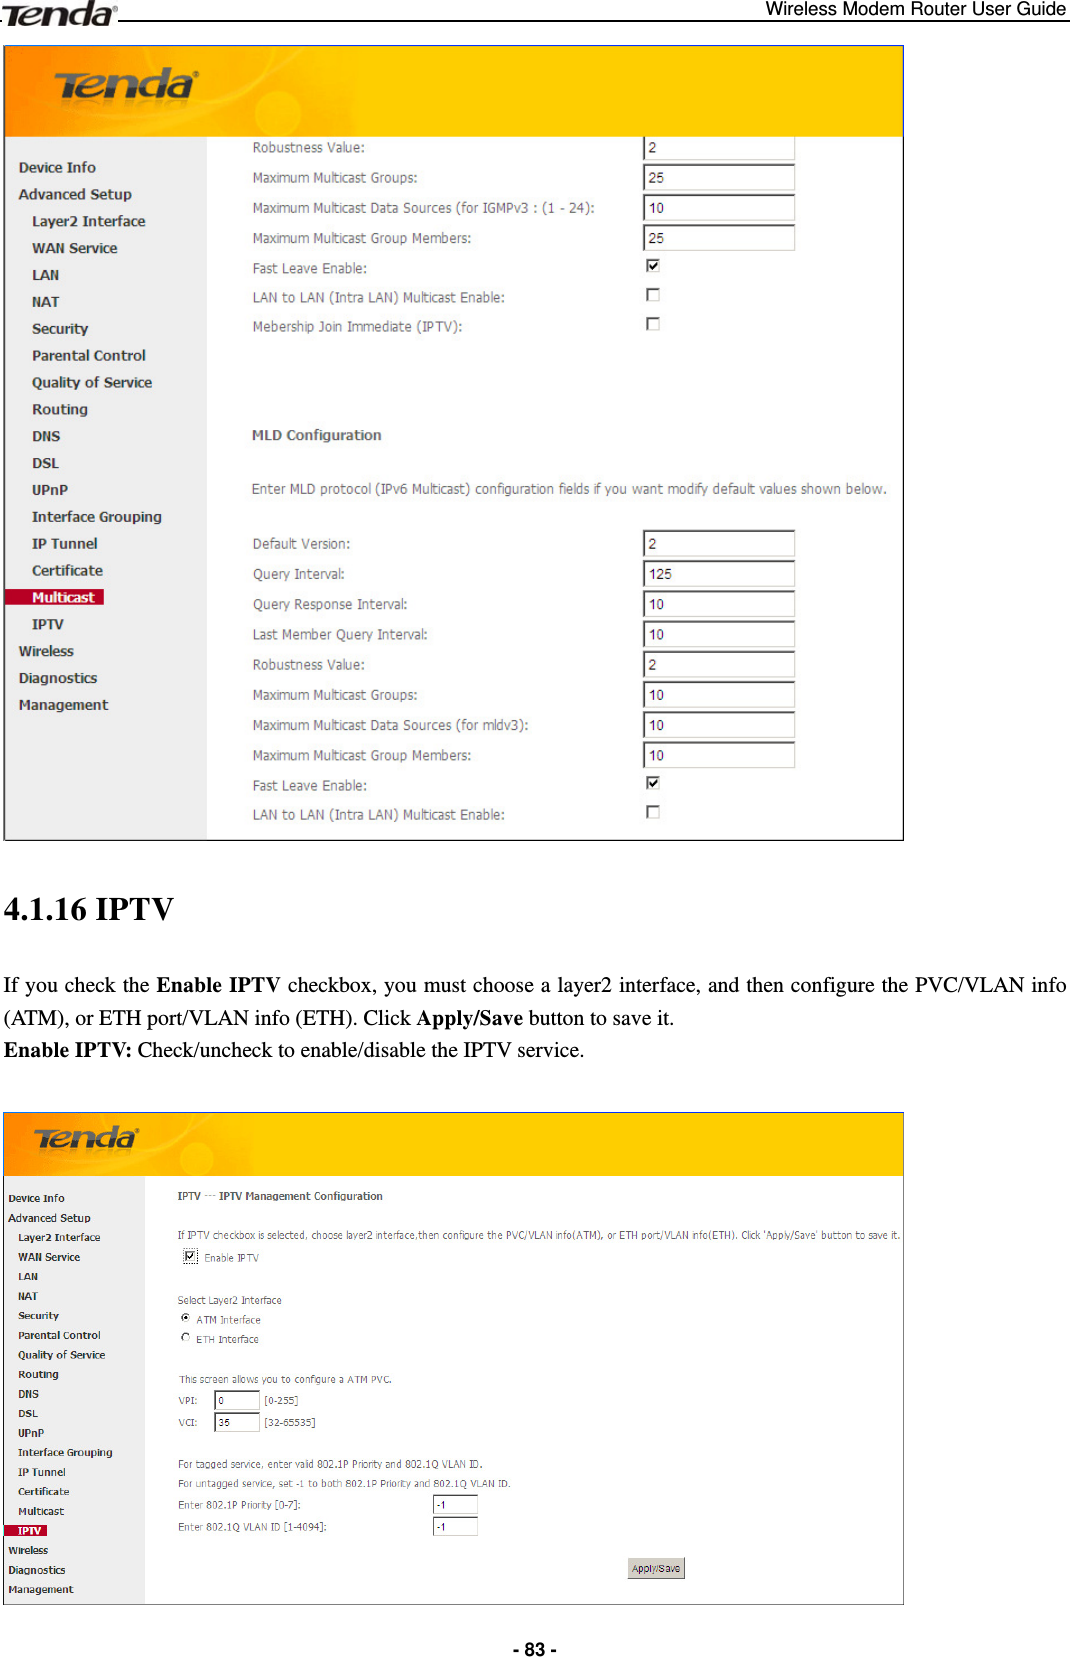 Wireless Modem Router User Guide  - 83 - 4.1.16 IPTV If you check the Enable IPTV checkbox, you must choose a layer2 interface, and then configure the PVC/VLAN info (ATM), or ETH port/VLAN info (ETH). Click Apply/Save button to save it.   Enable IPTV: Check/uncheck to enable/disable the IPTV service.   